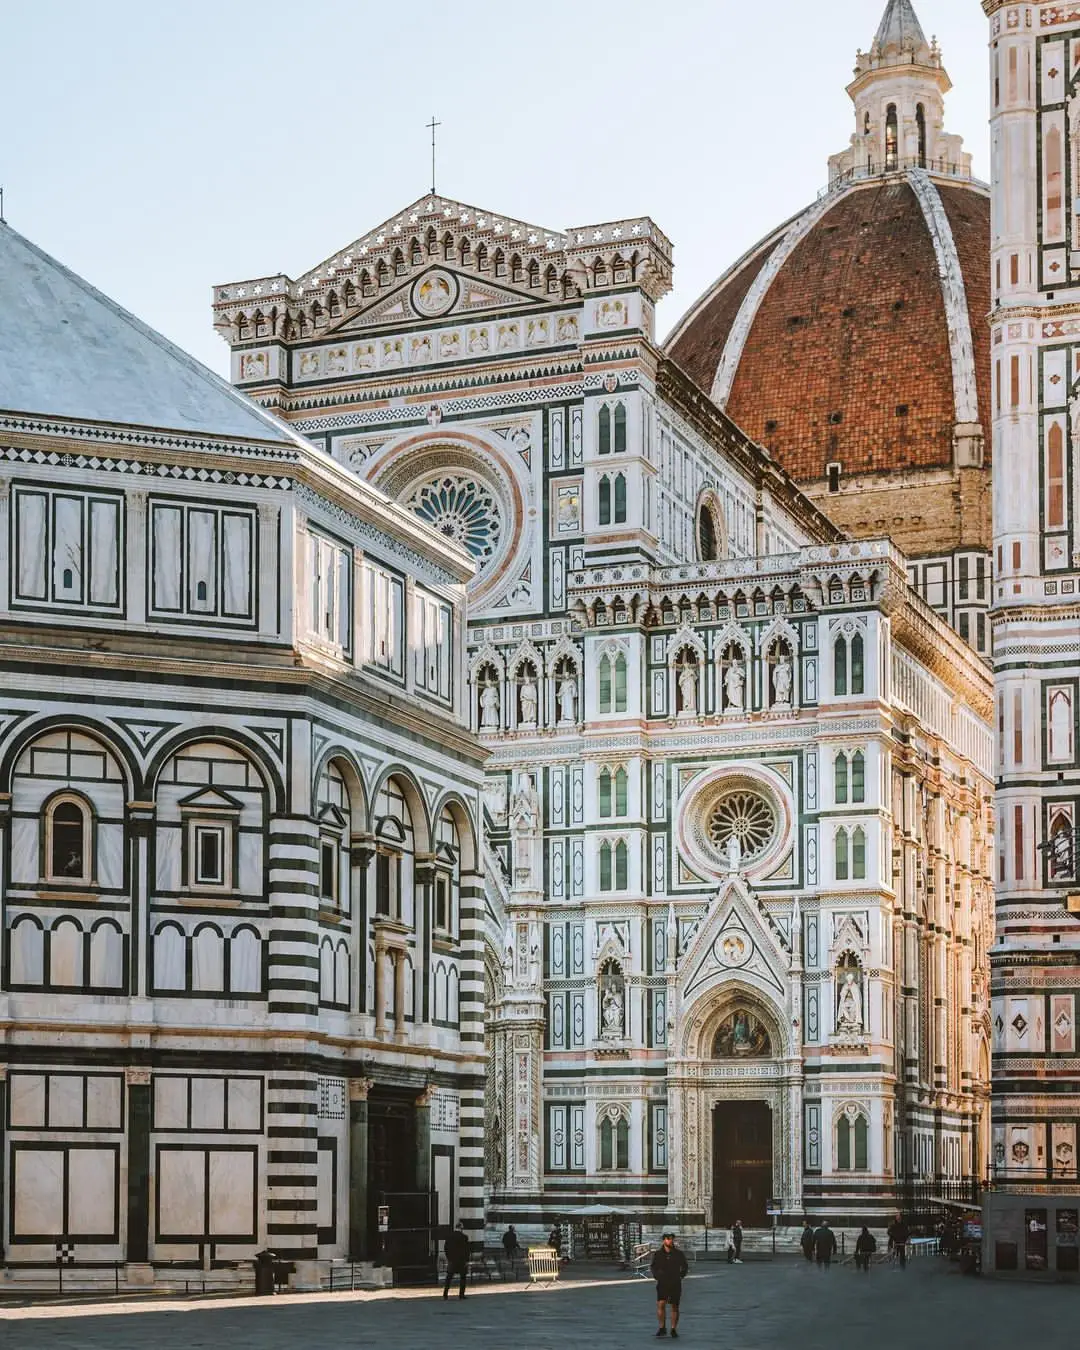 The 20 Most Instagrammed Places of 2015 ...